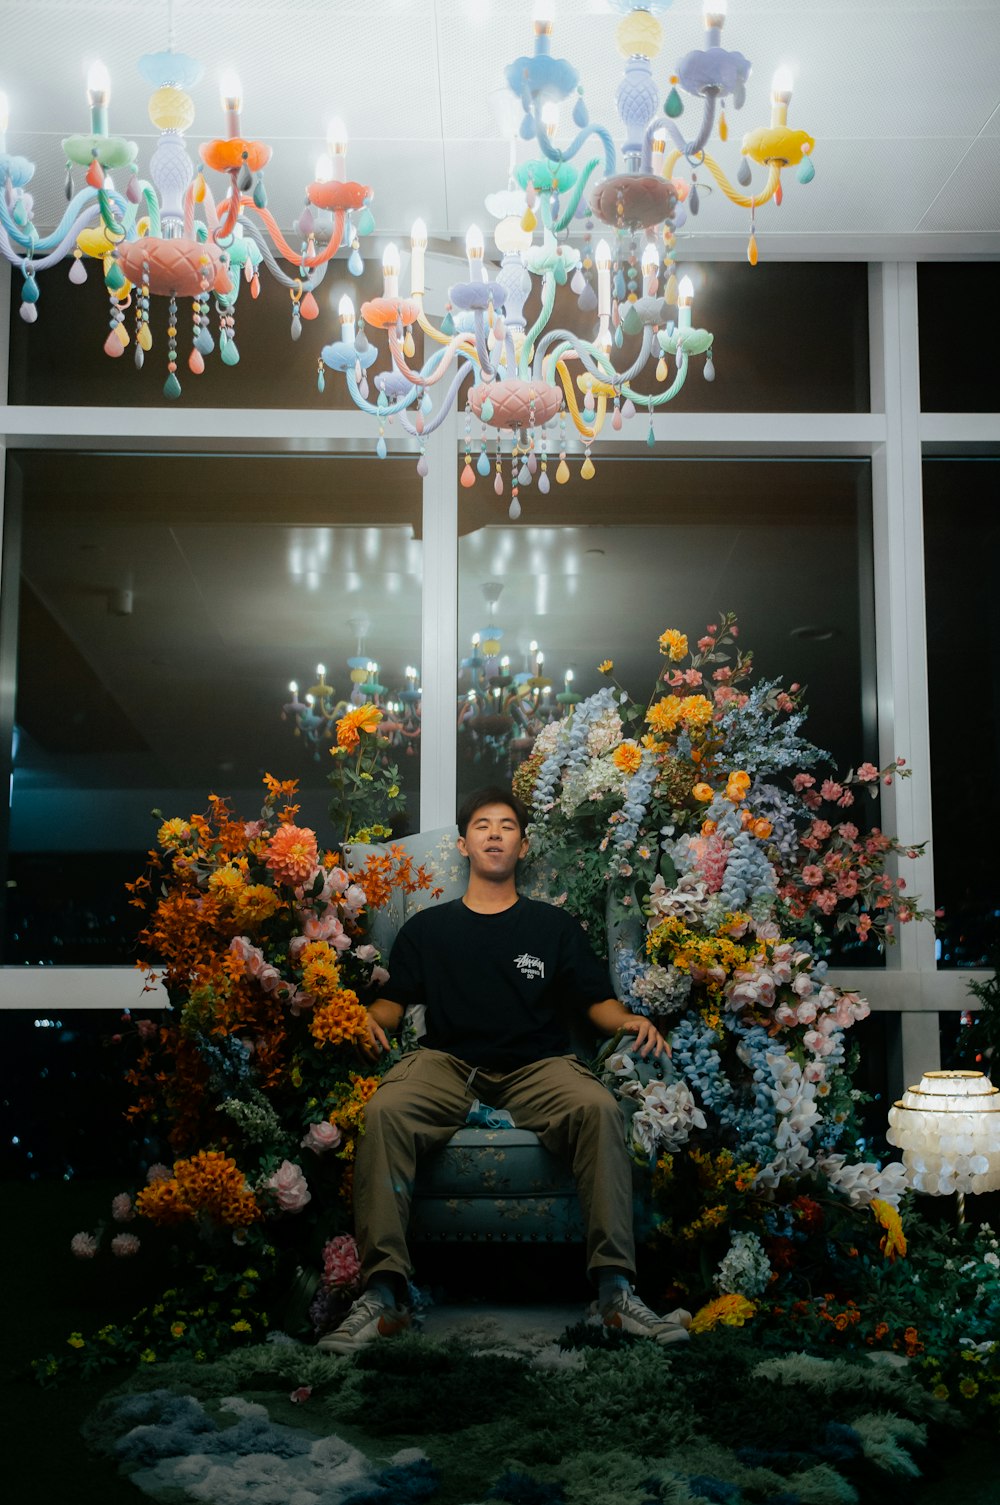 a man sitting on a chair in front of a chandelier